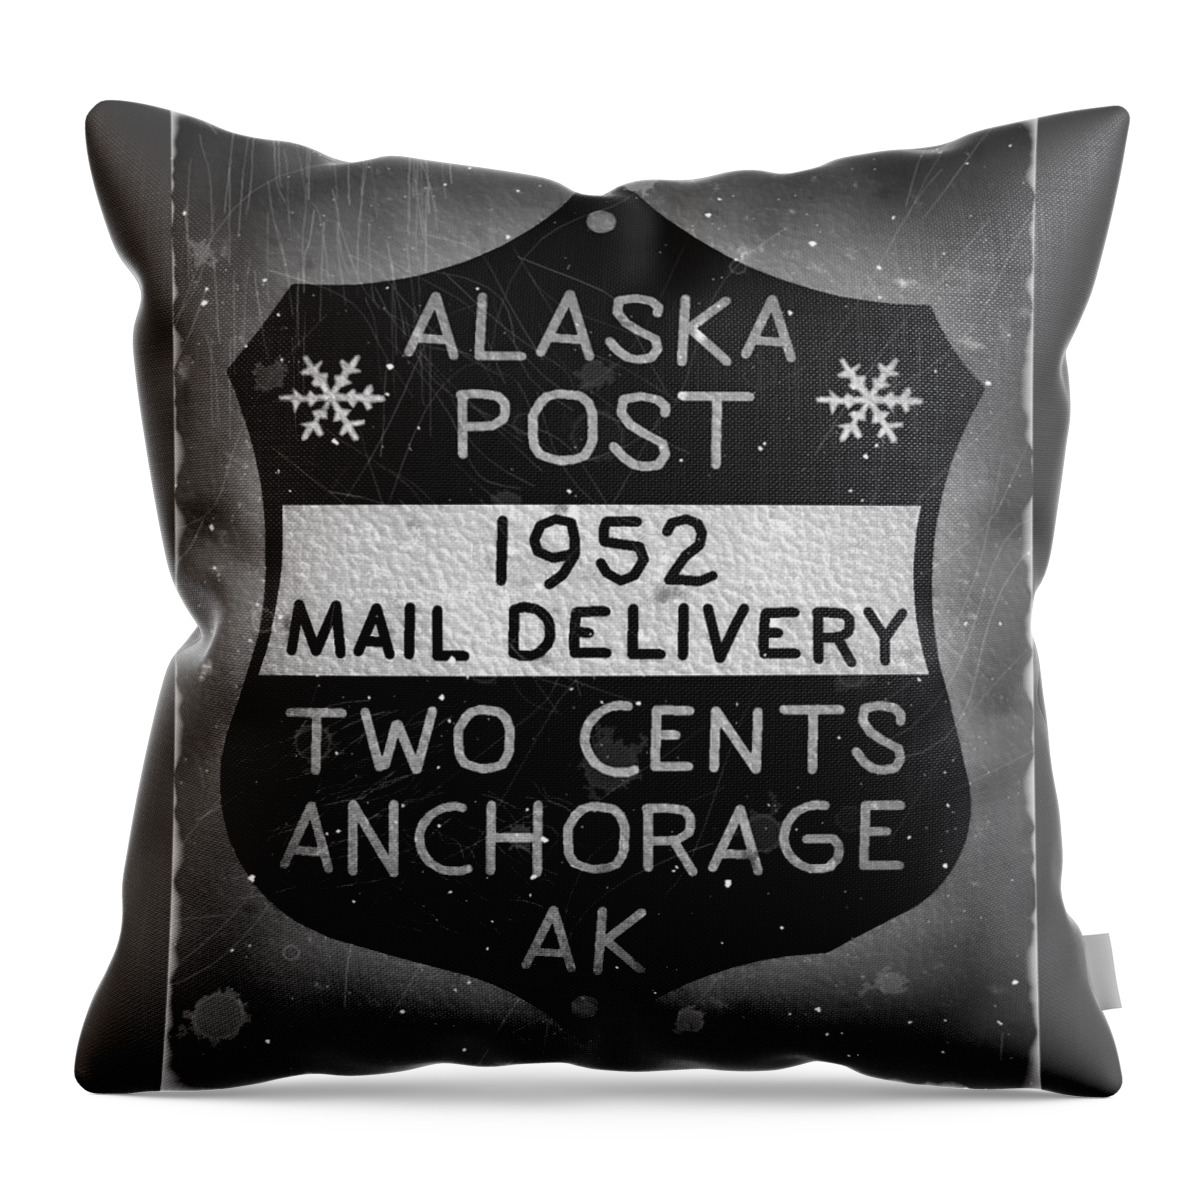 Dispatch Throw Pillow featuring the digital art 1952 Union PO - Anchorage Alaska - 2cts. Local Mail Delivery - Winter Gray - Mail Art Post by Fred Larucci